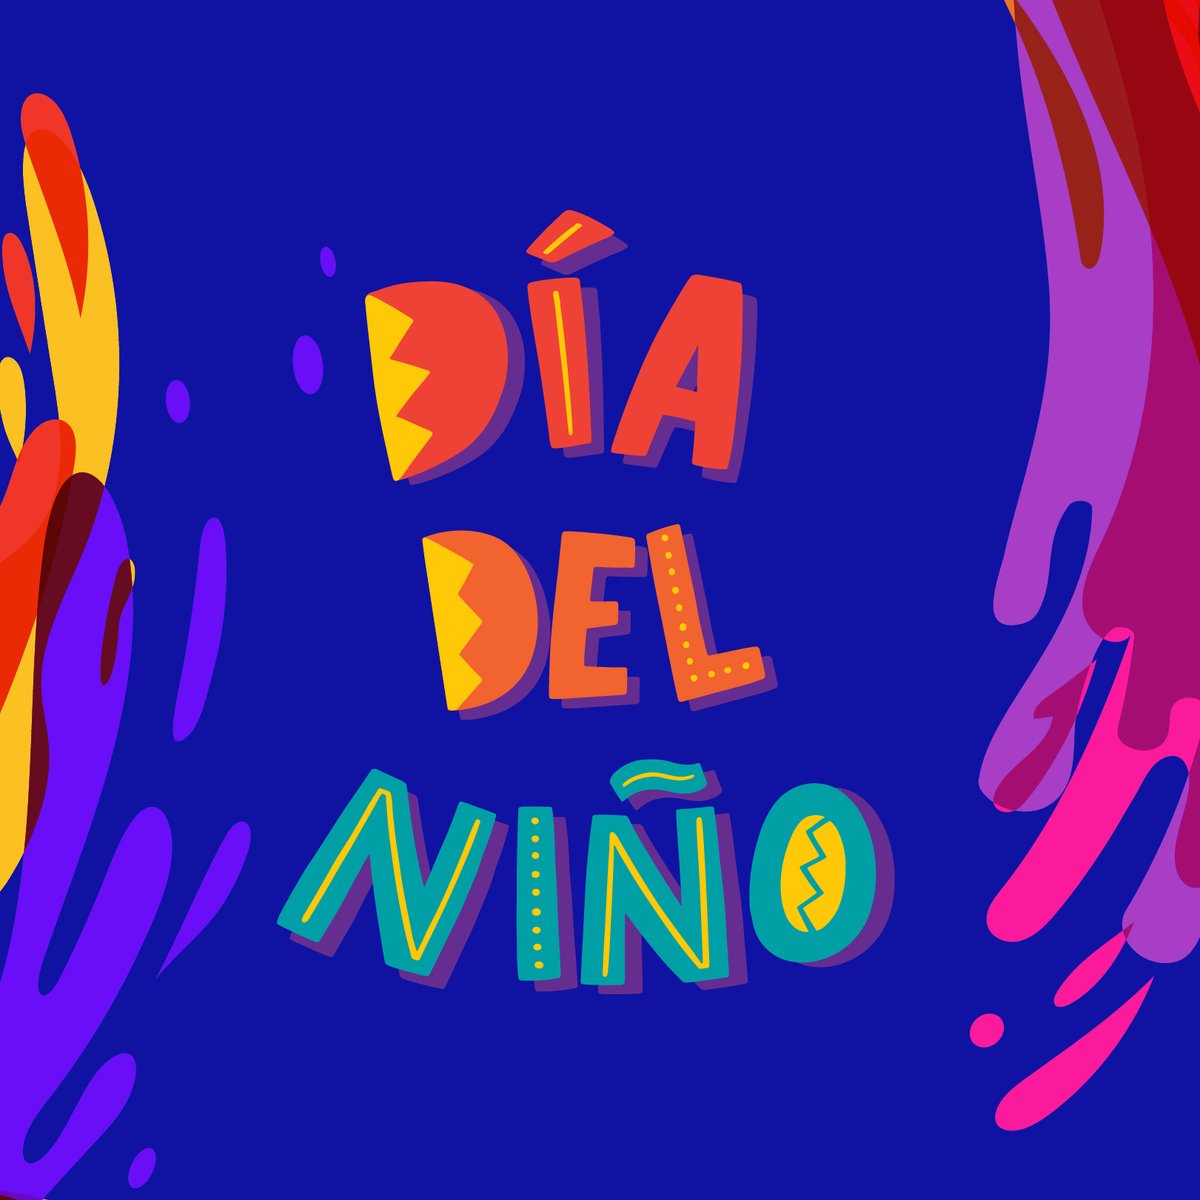 Join us in celebrating Día del Niño (Children's Day) across some library locations with music, fun activities, and treats! Events are happening today through Tuesday, April 30. View all events here: denlib.org/niño24